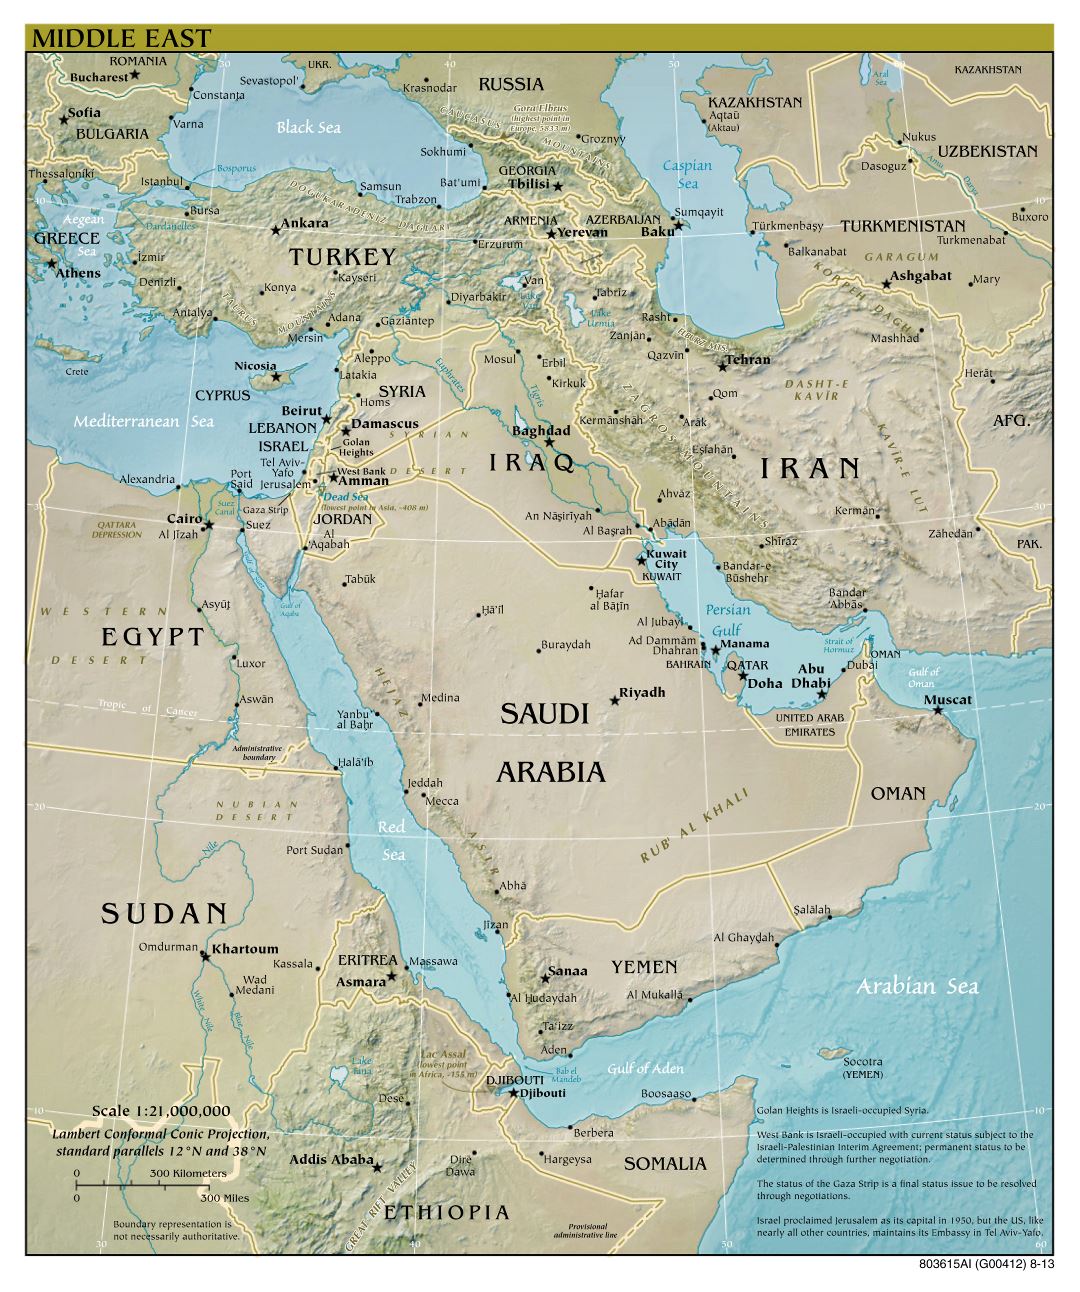 Large scale political map of the Middle East with relief and major cities - 2013